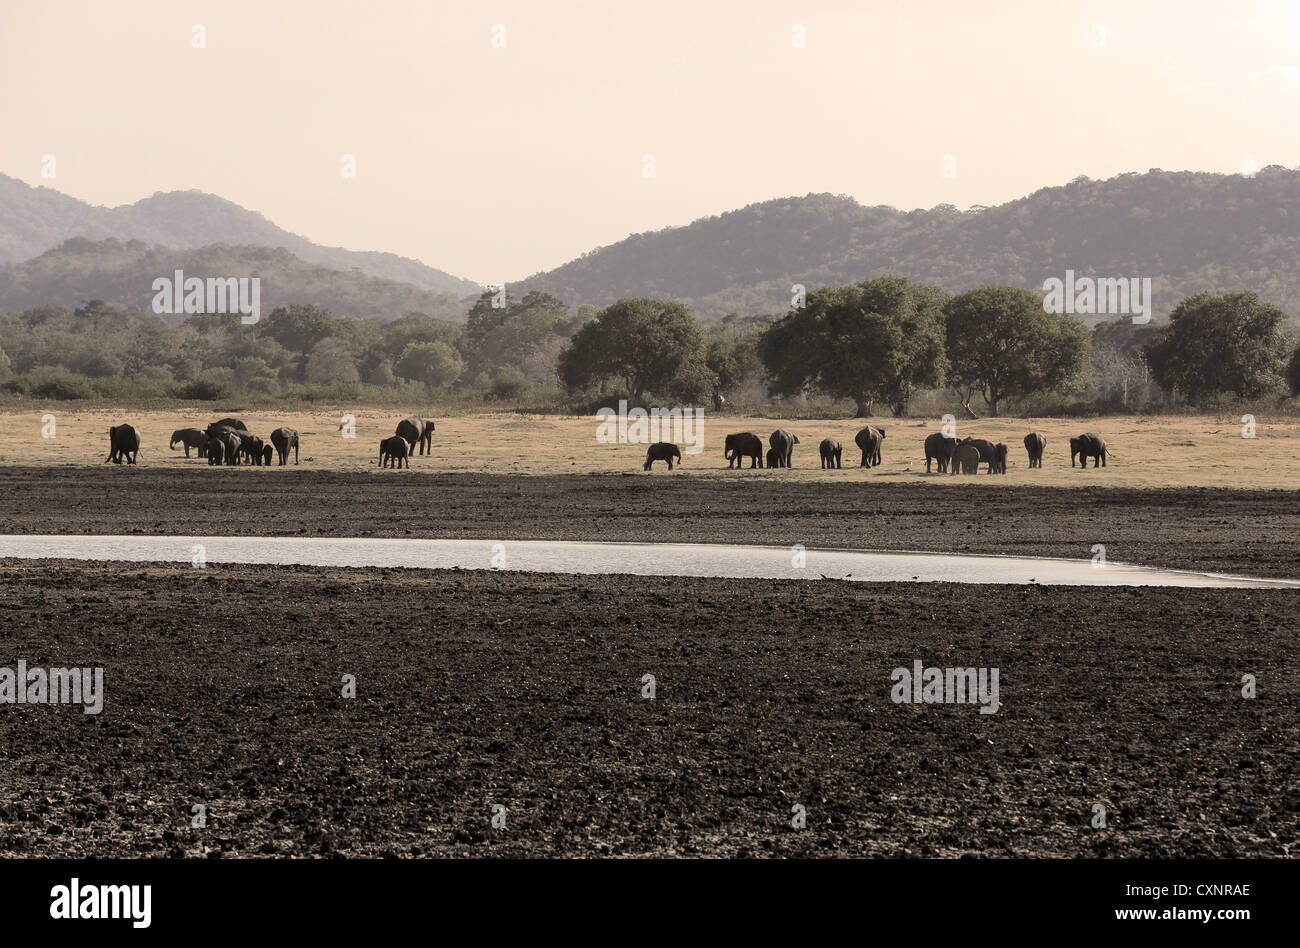 Herd of elephants stand next to an almost dry water hole during a drought at Minneriya National Park in Sri Lanka. Stock Photo